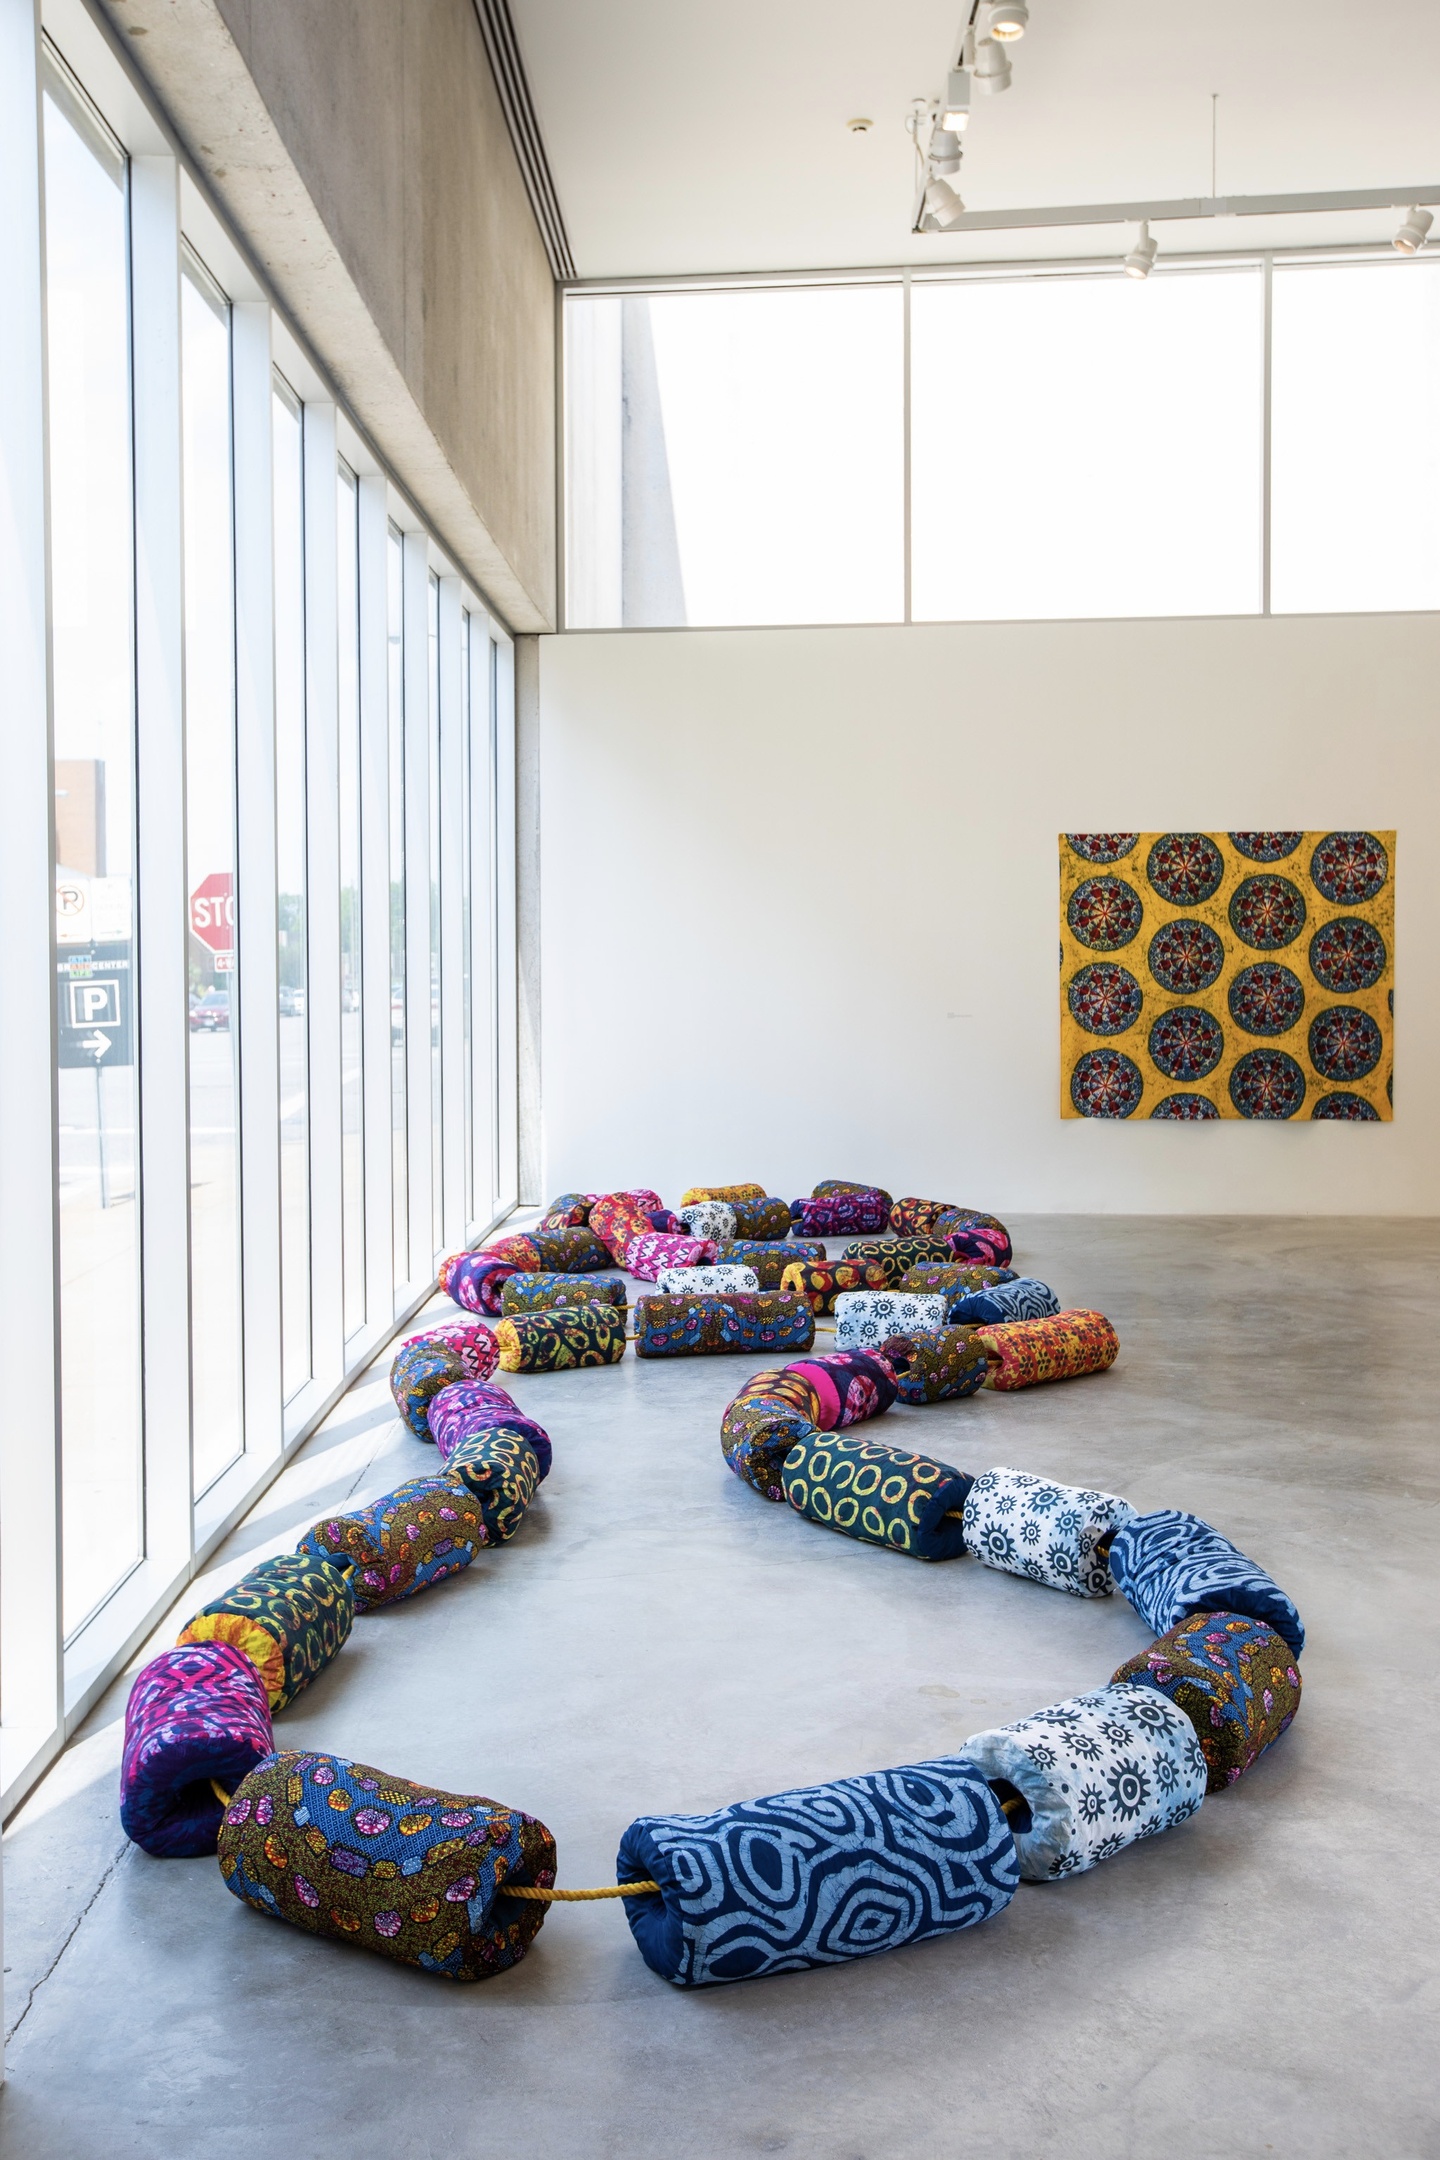 Photo of a sculptural installation in a white box gallery, with floor-to-ceiling windows to the left and a bank of high windows on the back wall. In the foreground, on the floor, is a sculptural installation of large, fabric-covered cylinders, strung together like a necklace, roughly shaped like an 8. On the back wall is an artwork with a golden background and circles. 